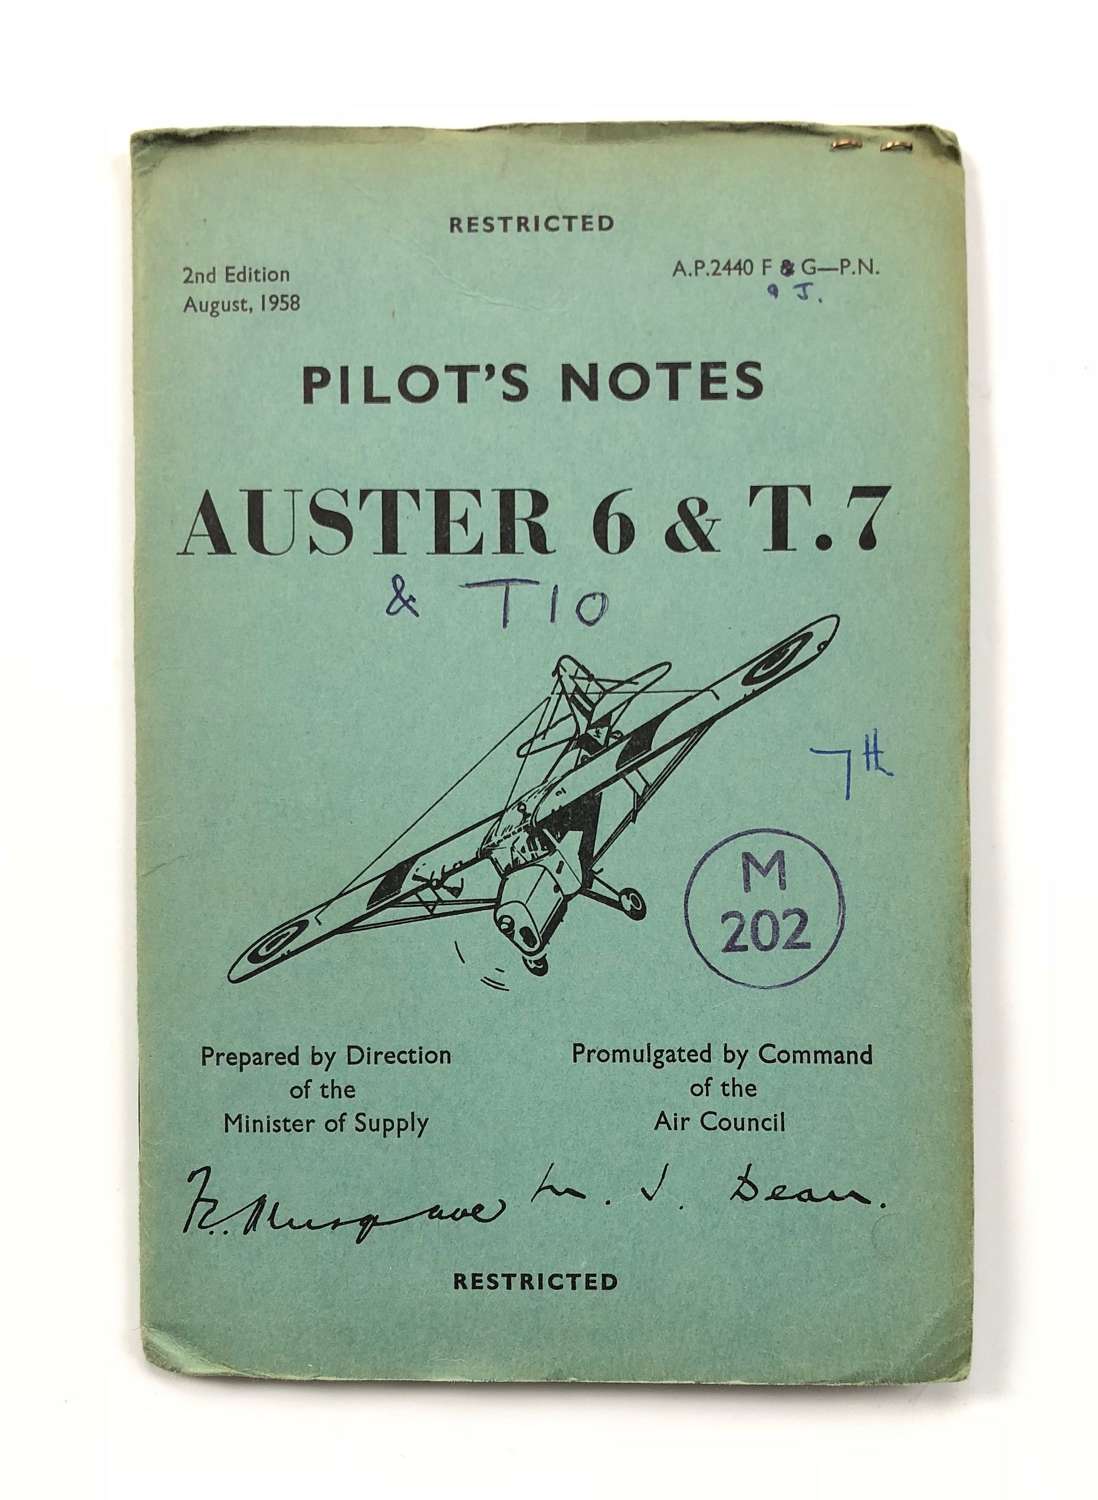 RAF / Army Cold War Pilot Notes Auster 6 & T7 1961.